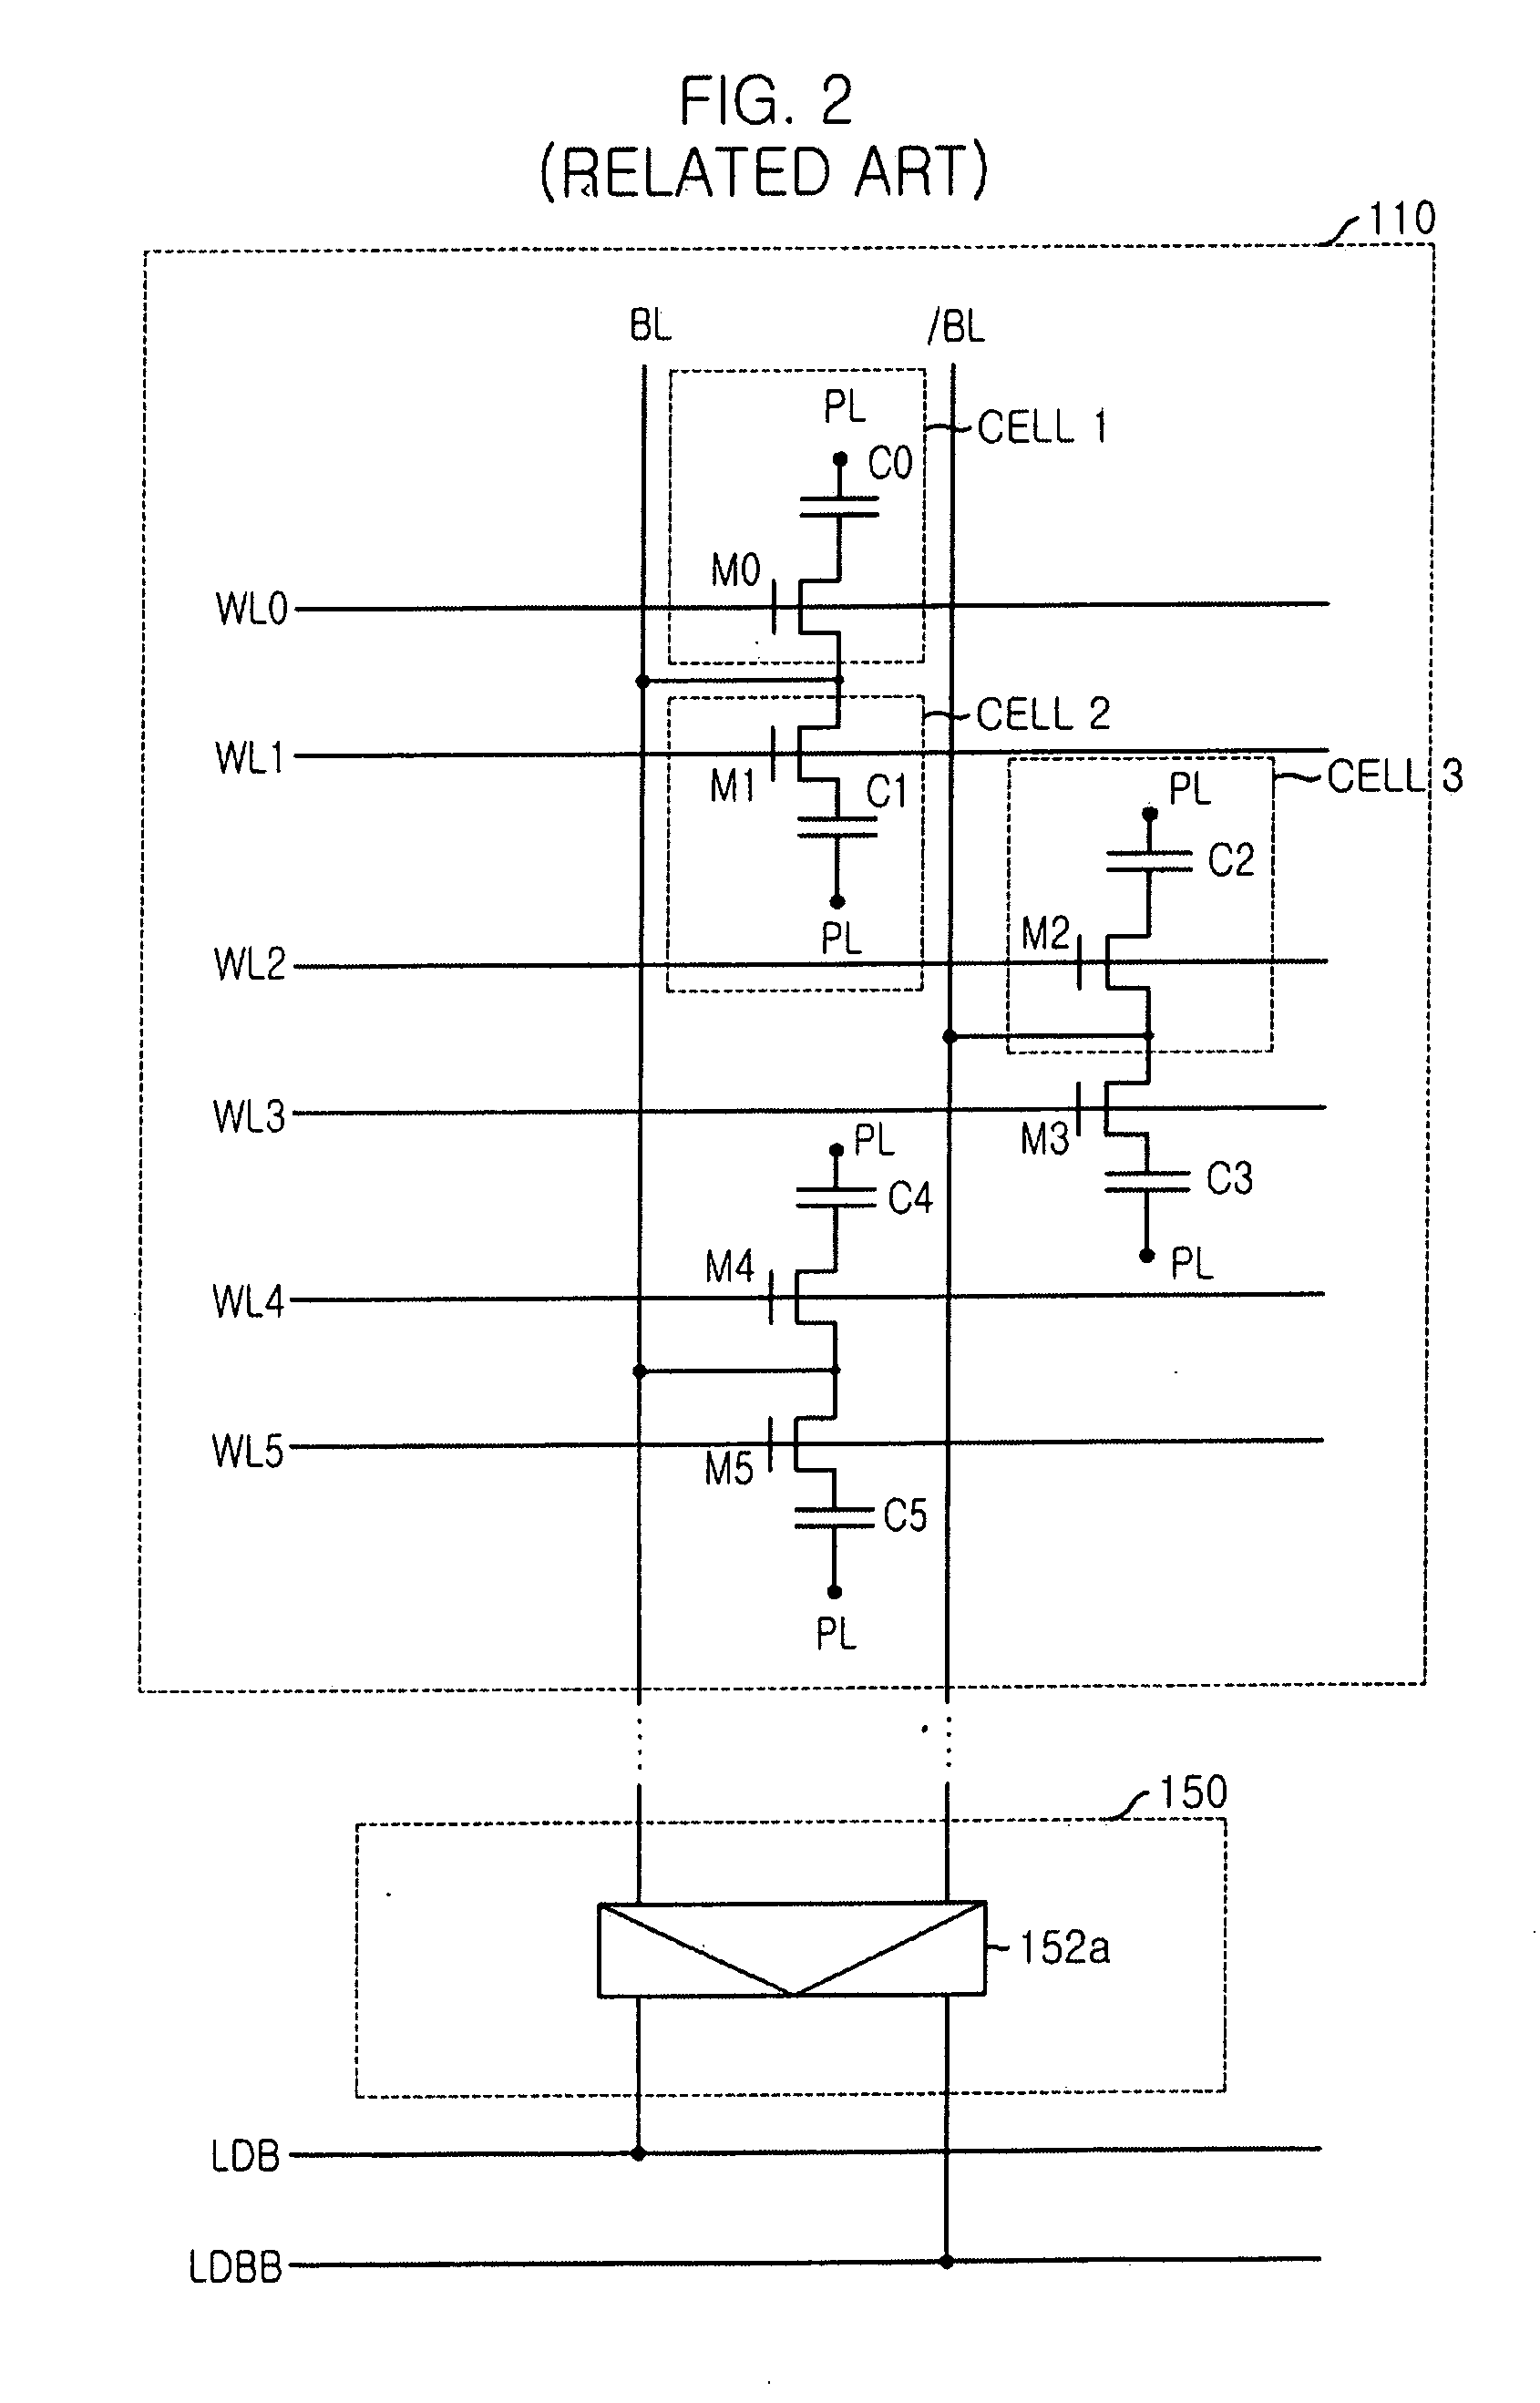 Semiconductor memory device for low voltage